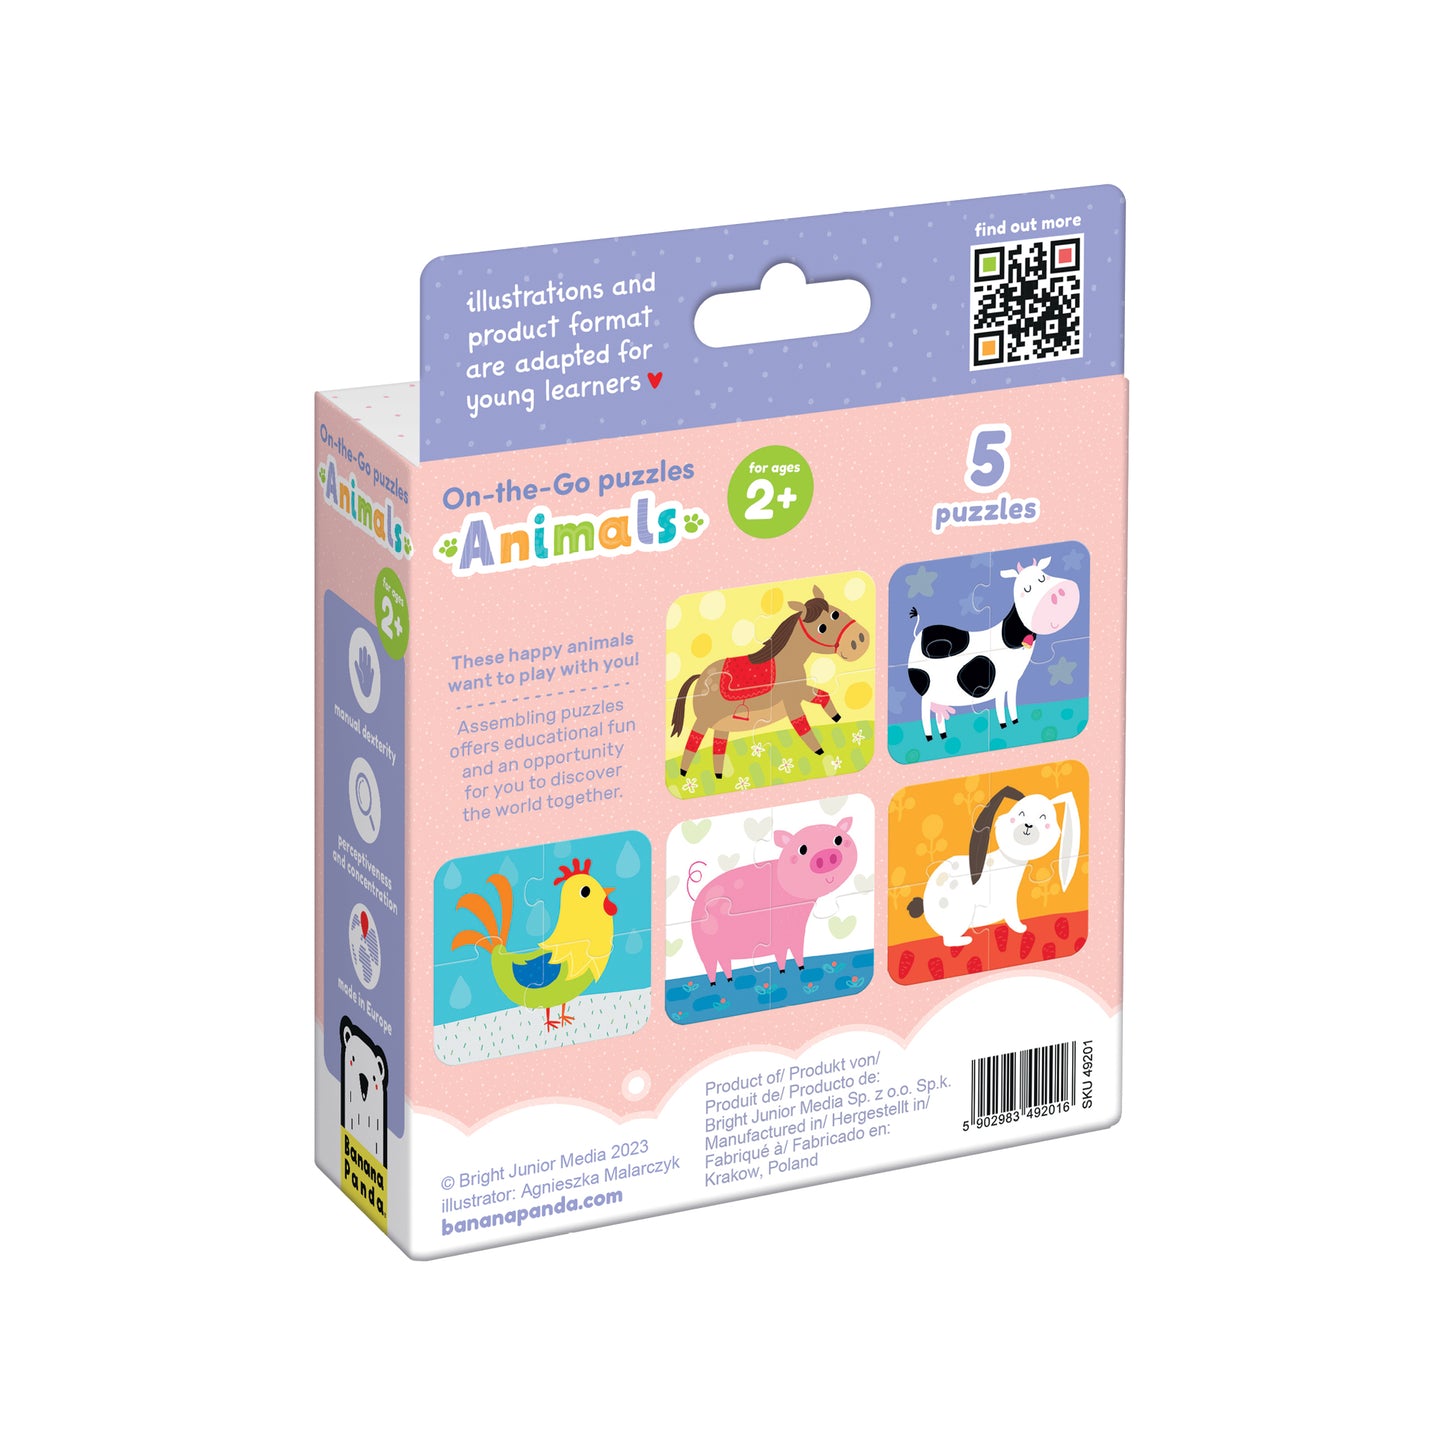 On-the-Go Puzzles Animals